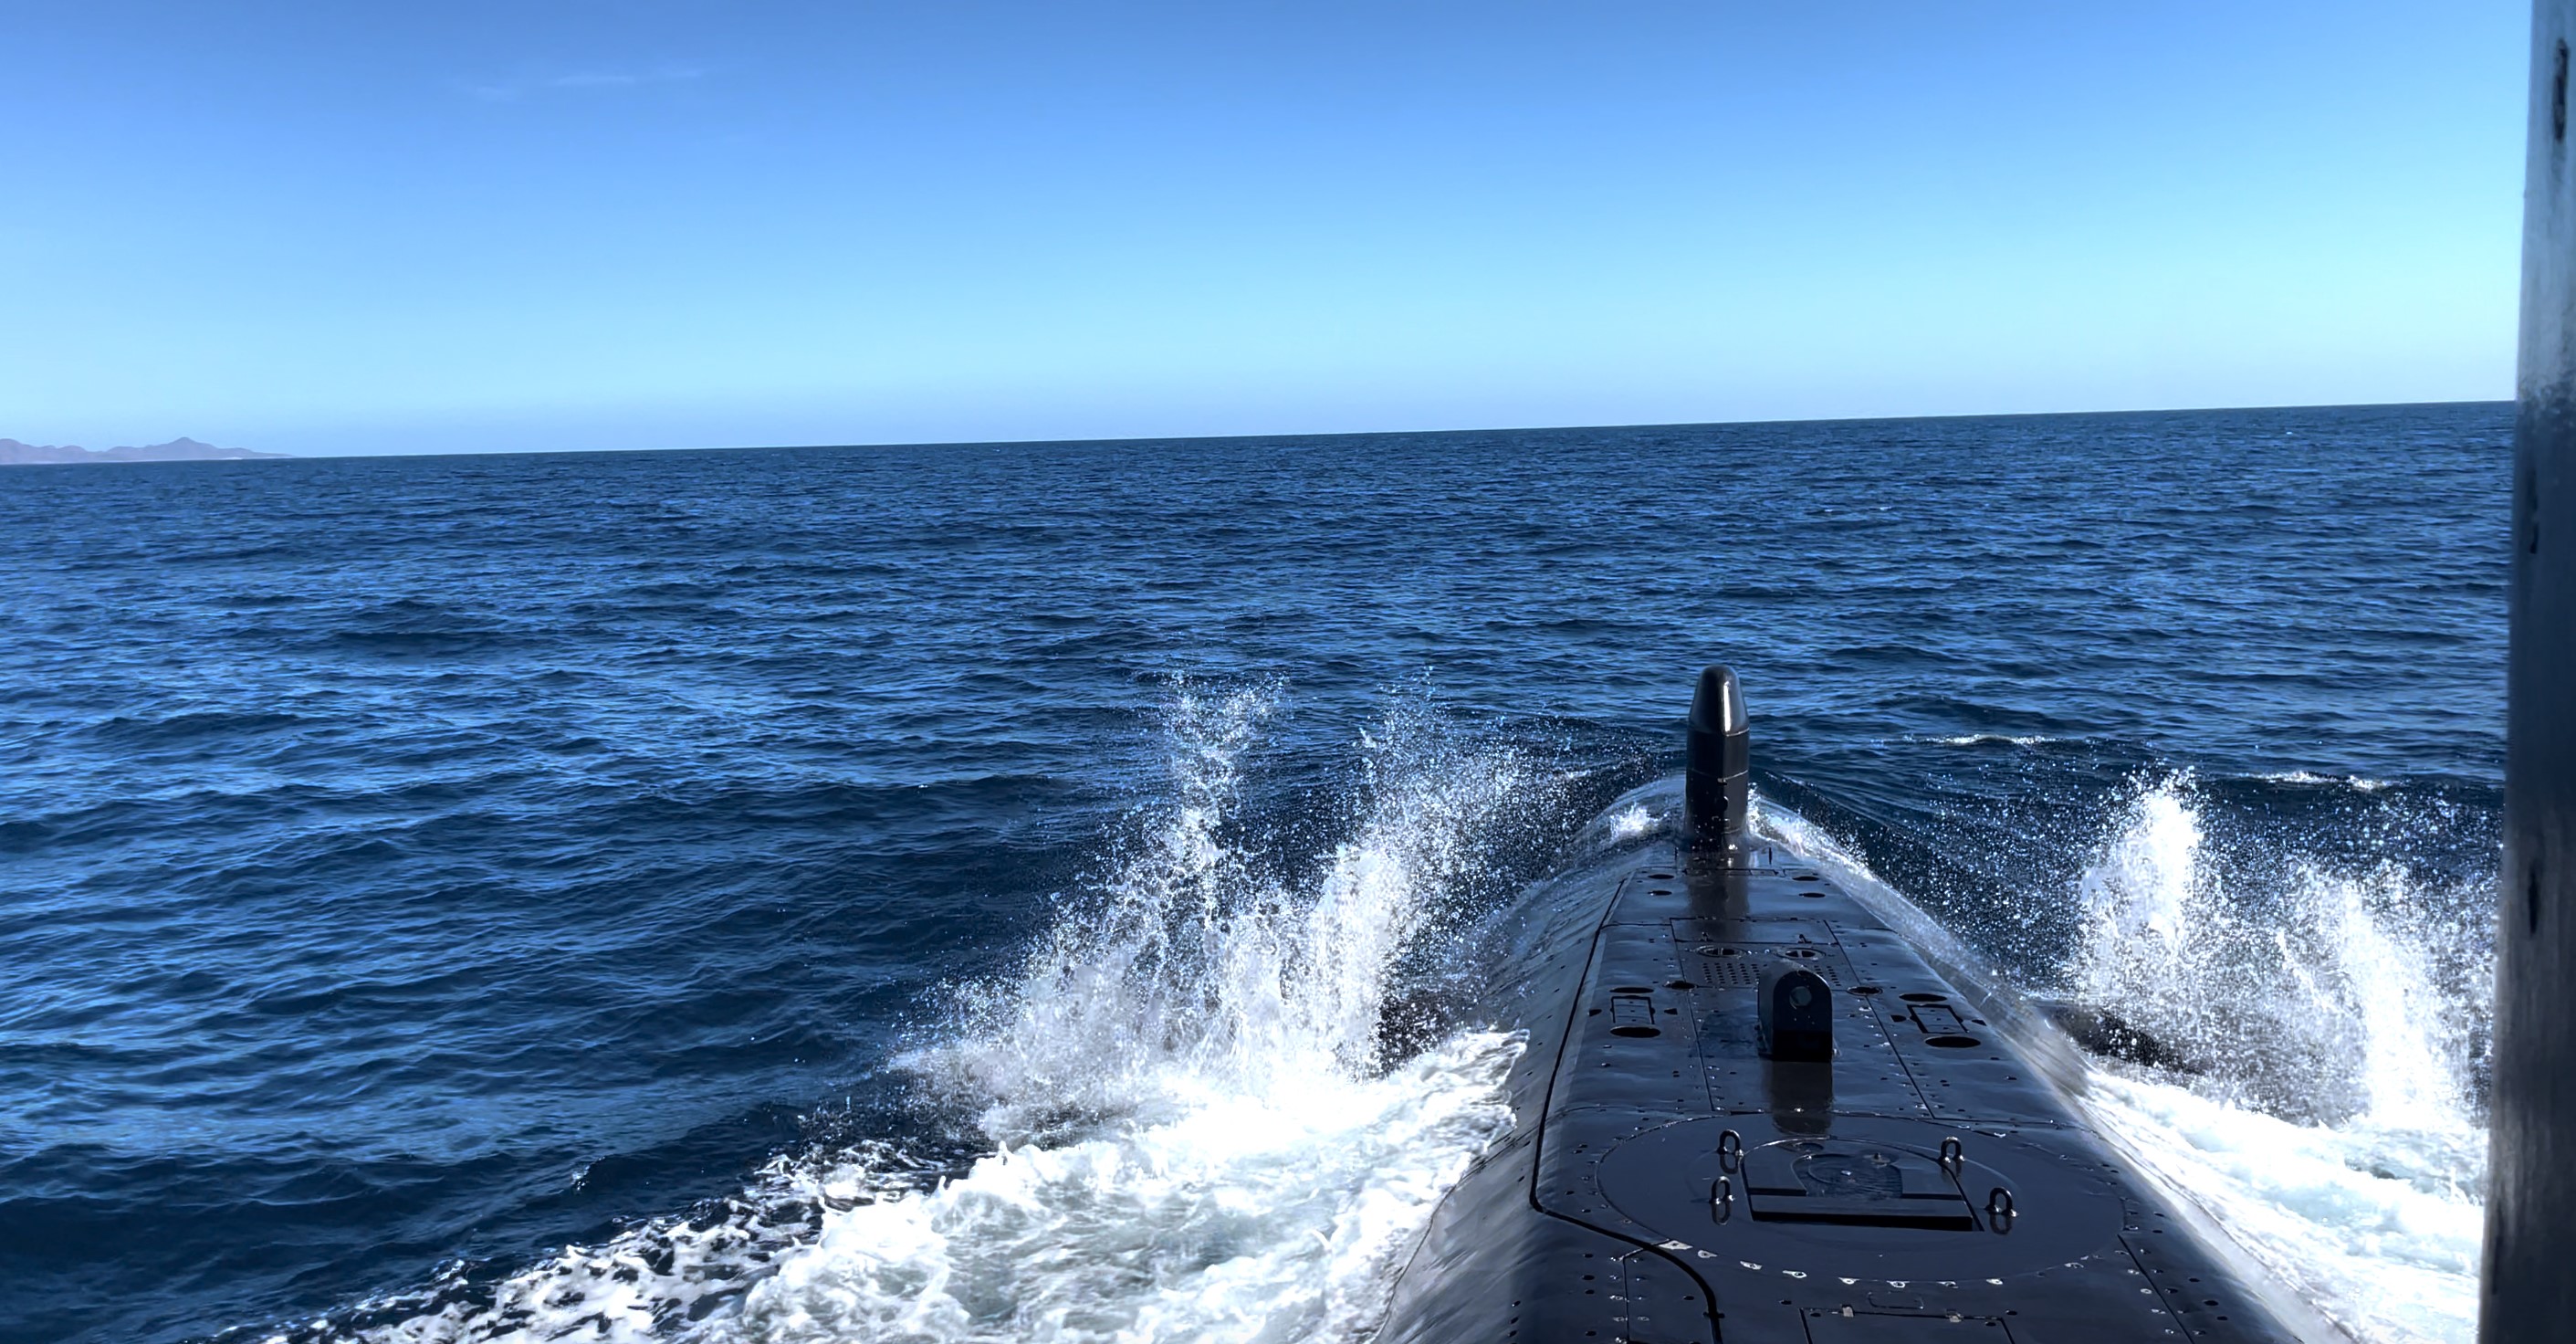 The submarine 'Galerna' on its way to its patrol area